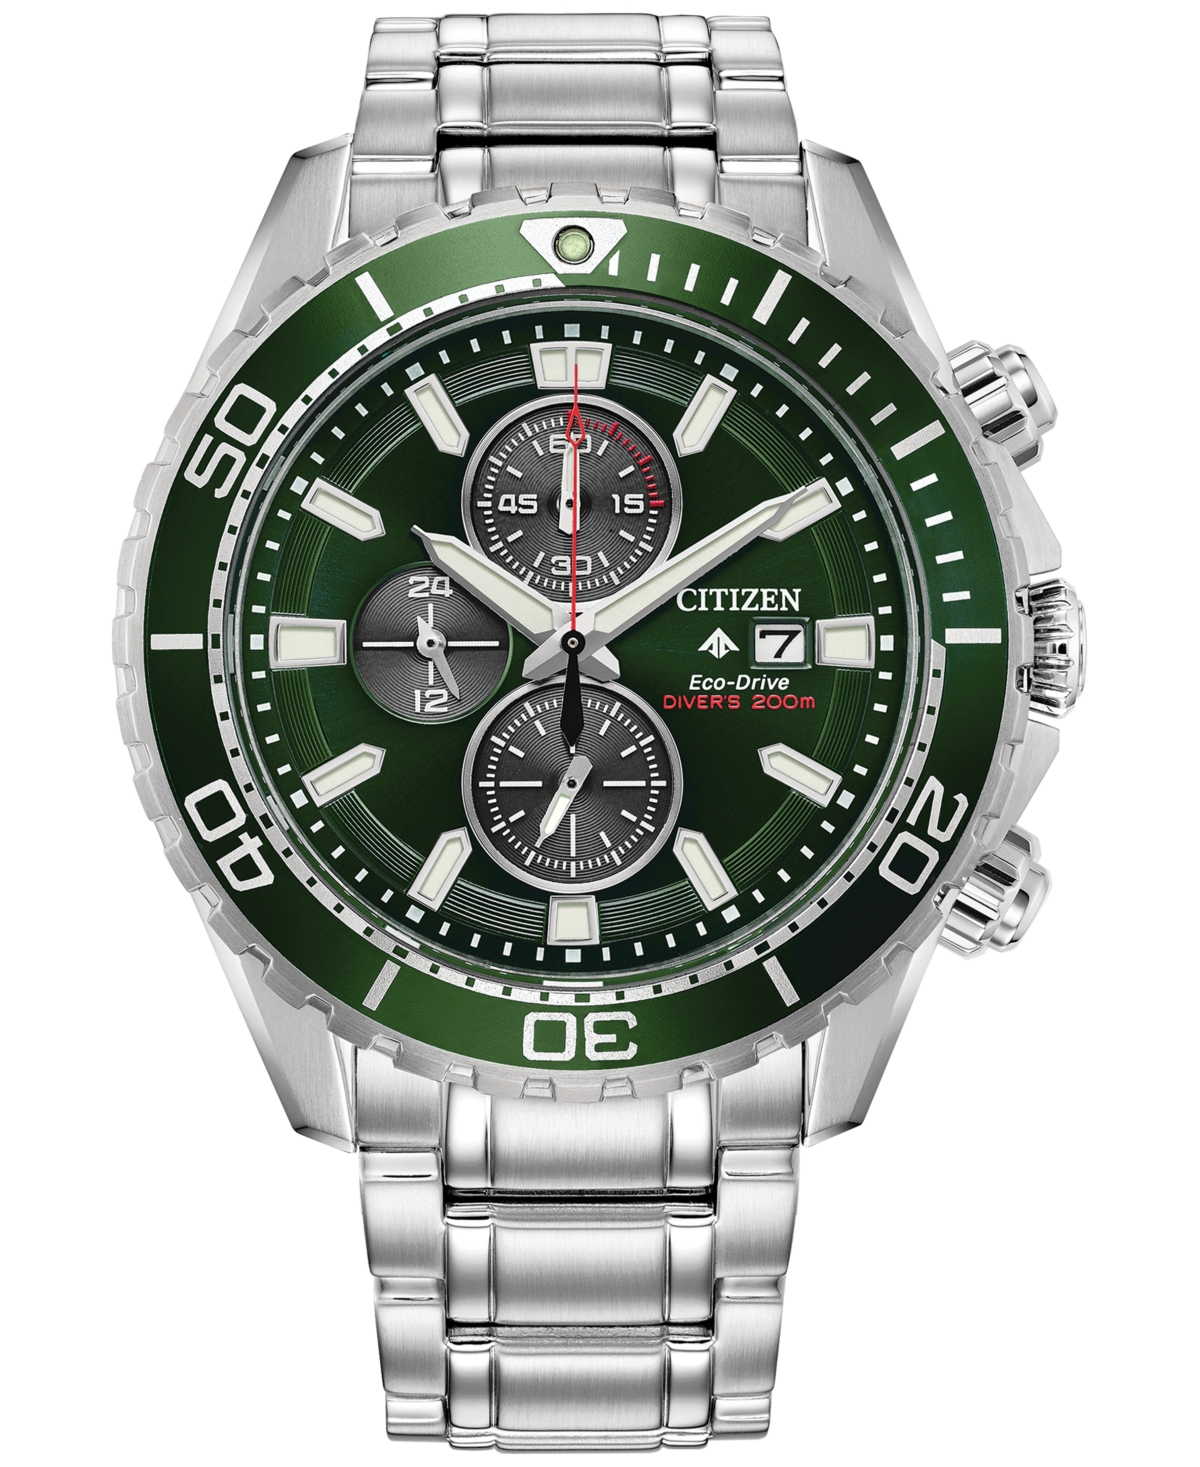 Citizen Eco-drive Men's Chronograph Promaster Dive Stainless Steel Bracelet Watch 45mm In Green